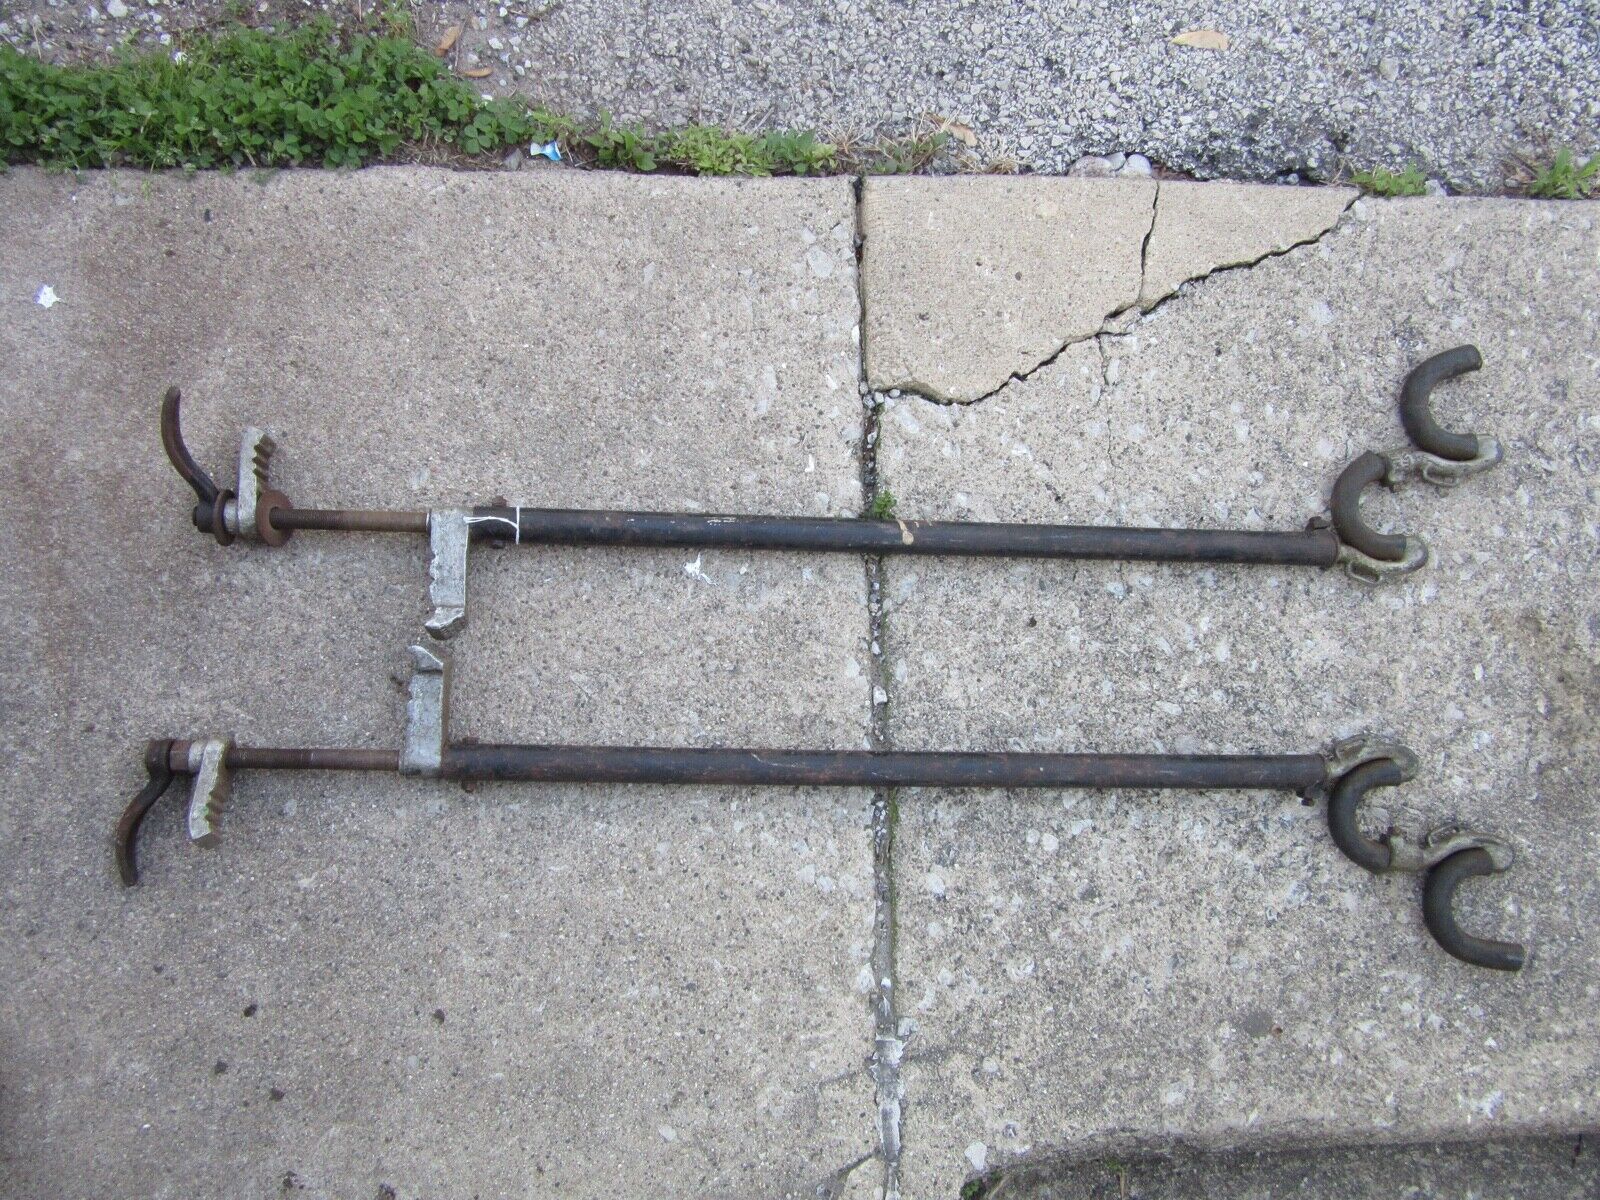 Antique Vintage Natl Cycle L.A. Auto-Bike Bicycle Rack - Bumper? Running Board?